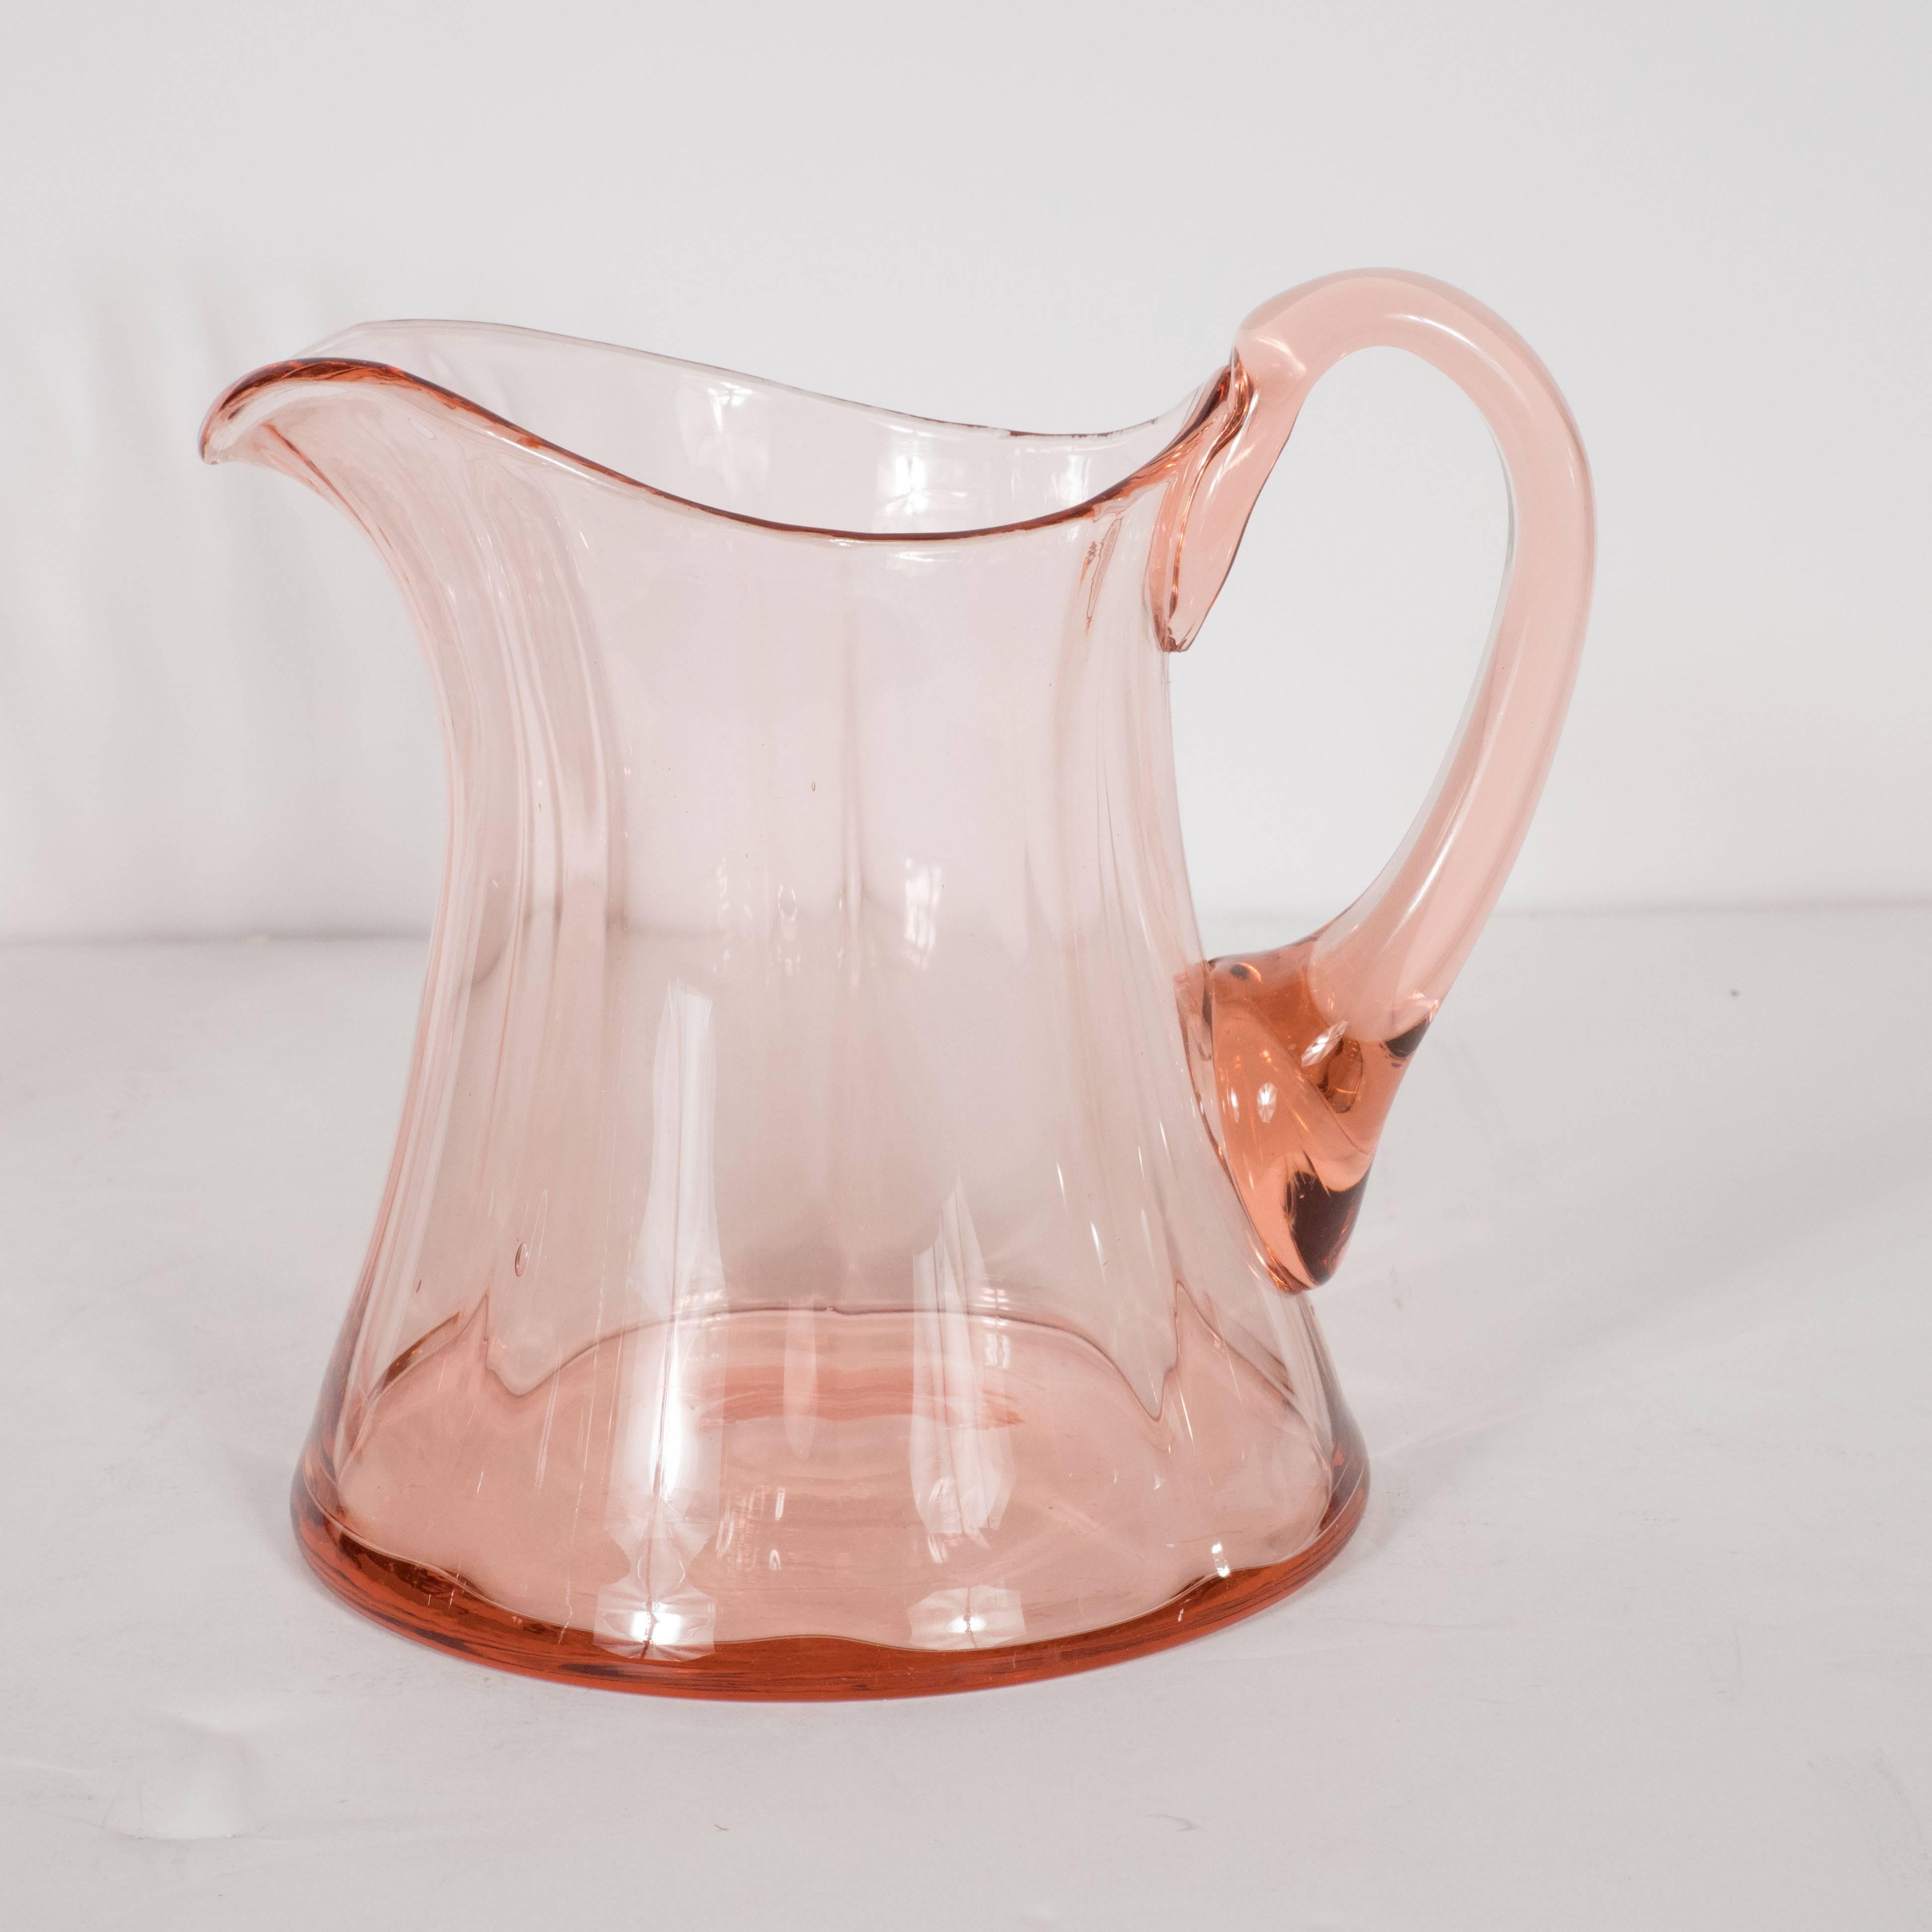 The pitcher offers a billowing channeled form with a gently curved front culminating in an undulating lip blown in a blush rose hue. This pitcher would be perfect for serving lemonade, ice tea, punch or any number of drinks. It represents a